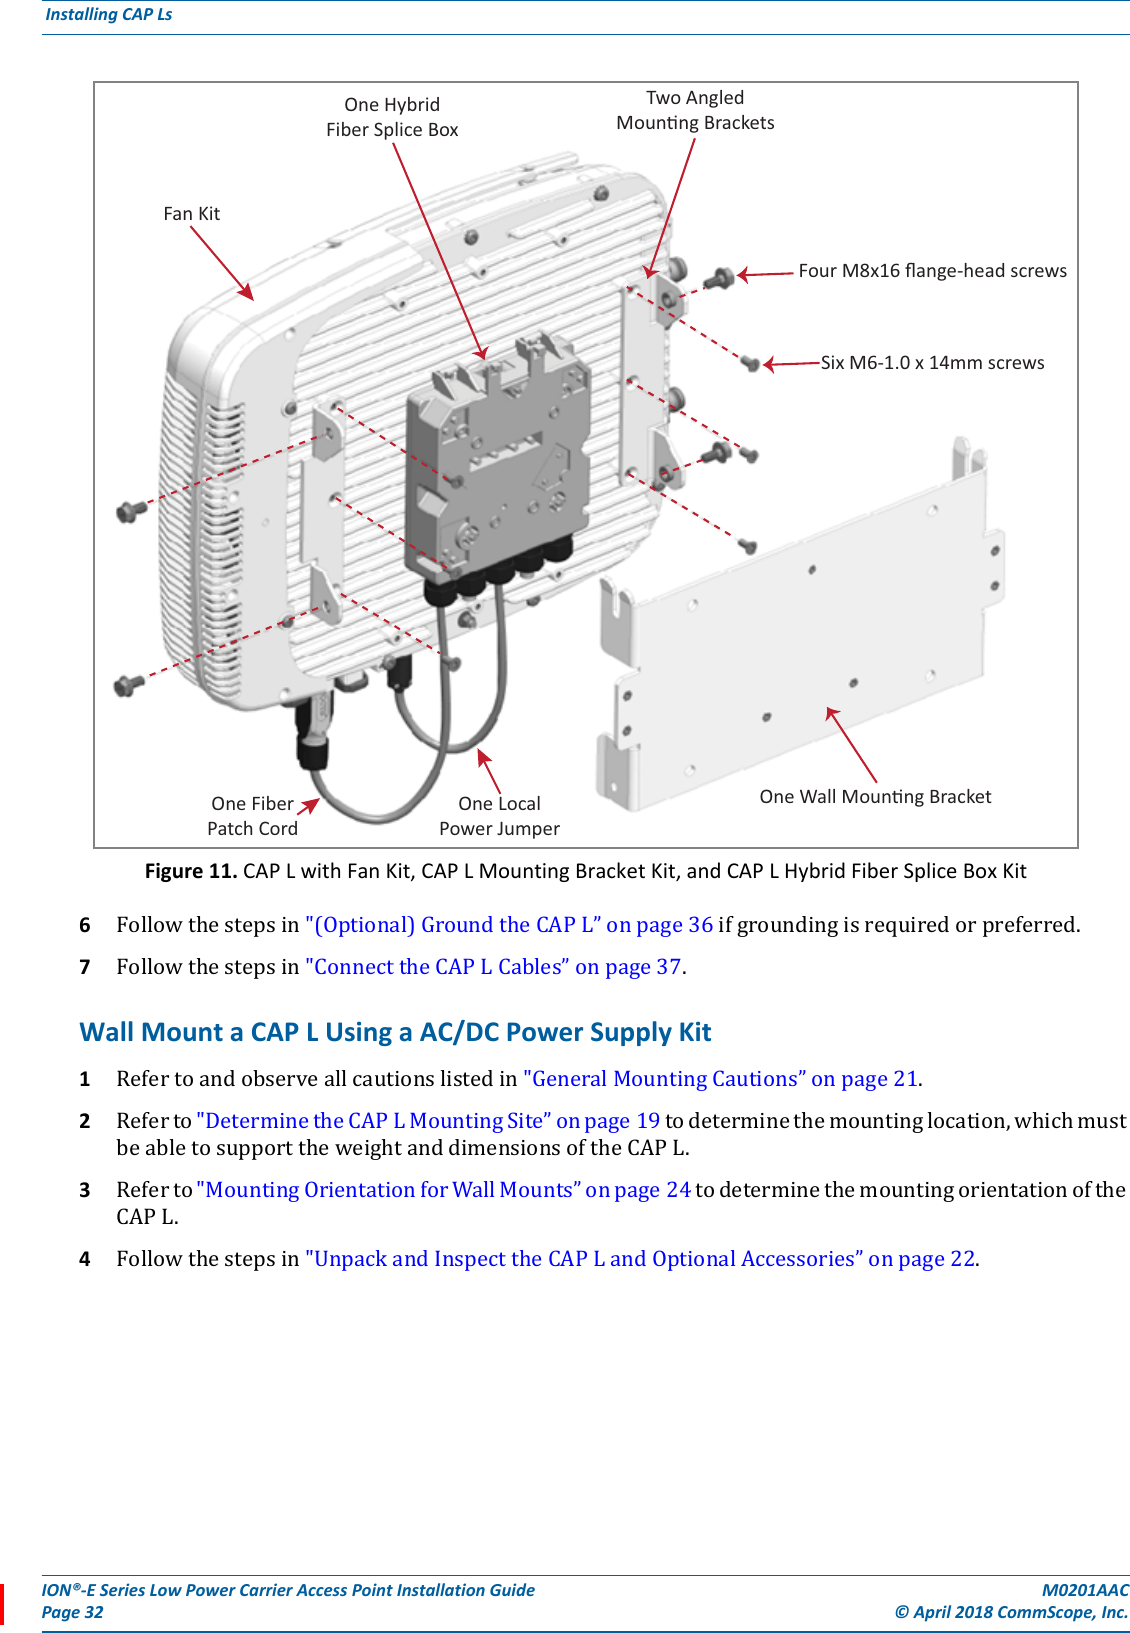 ION®-E Series Low Power Carrier Access Point Installation Guide M0201AACPage 32 © April 2018 CommScope, Inc. Installing CAP Ls  Figure 11. CAP L with Fan Kit, CAP L Mounting Bracket Kit, and CAP L Hybrid Fiber Splice Box Kit6Followthestepsin&quot;(Optional)GroundtheCAPL”onpage36ifgroundingisrequiredorpreferred.7Followthestepsin&quot;ConnecttheCAPLCables”onpage37.Wall Mount a CAP L Using a AC/DC Power Supply Kit 1Refertoandobserveallcautionslistedin&quot;GeneralMountingCautions”onpage21.2Referto&quot;DeterminetheCAPLMountingSite”onpage19todeterminethemountinglocation,whichmustbeabletosupporttheweightanddimensionsoftheCAPL.3Referto&quot;MountingOrientationforWallMounts”onpage24todeterminethemountingorientationoftheCAPL.4Followthestepsin&quot;UnpackandInspecttheCAPLandOptionalAccessories”onpage22.Two AngledMounng BracketsFour M8x16 ﬂange-head screwsSix M6-1.0 x 14mm screwsOne HybridFiber Splice BoxOne Wall Mounng BracketFan KitOne LocalPower JumperOne FiberPatch Cord